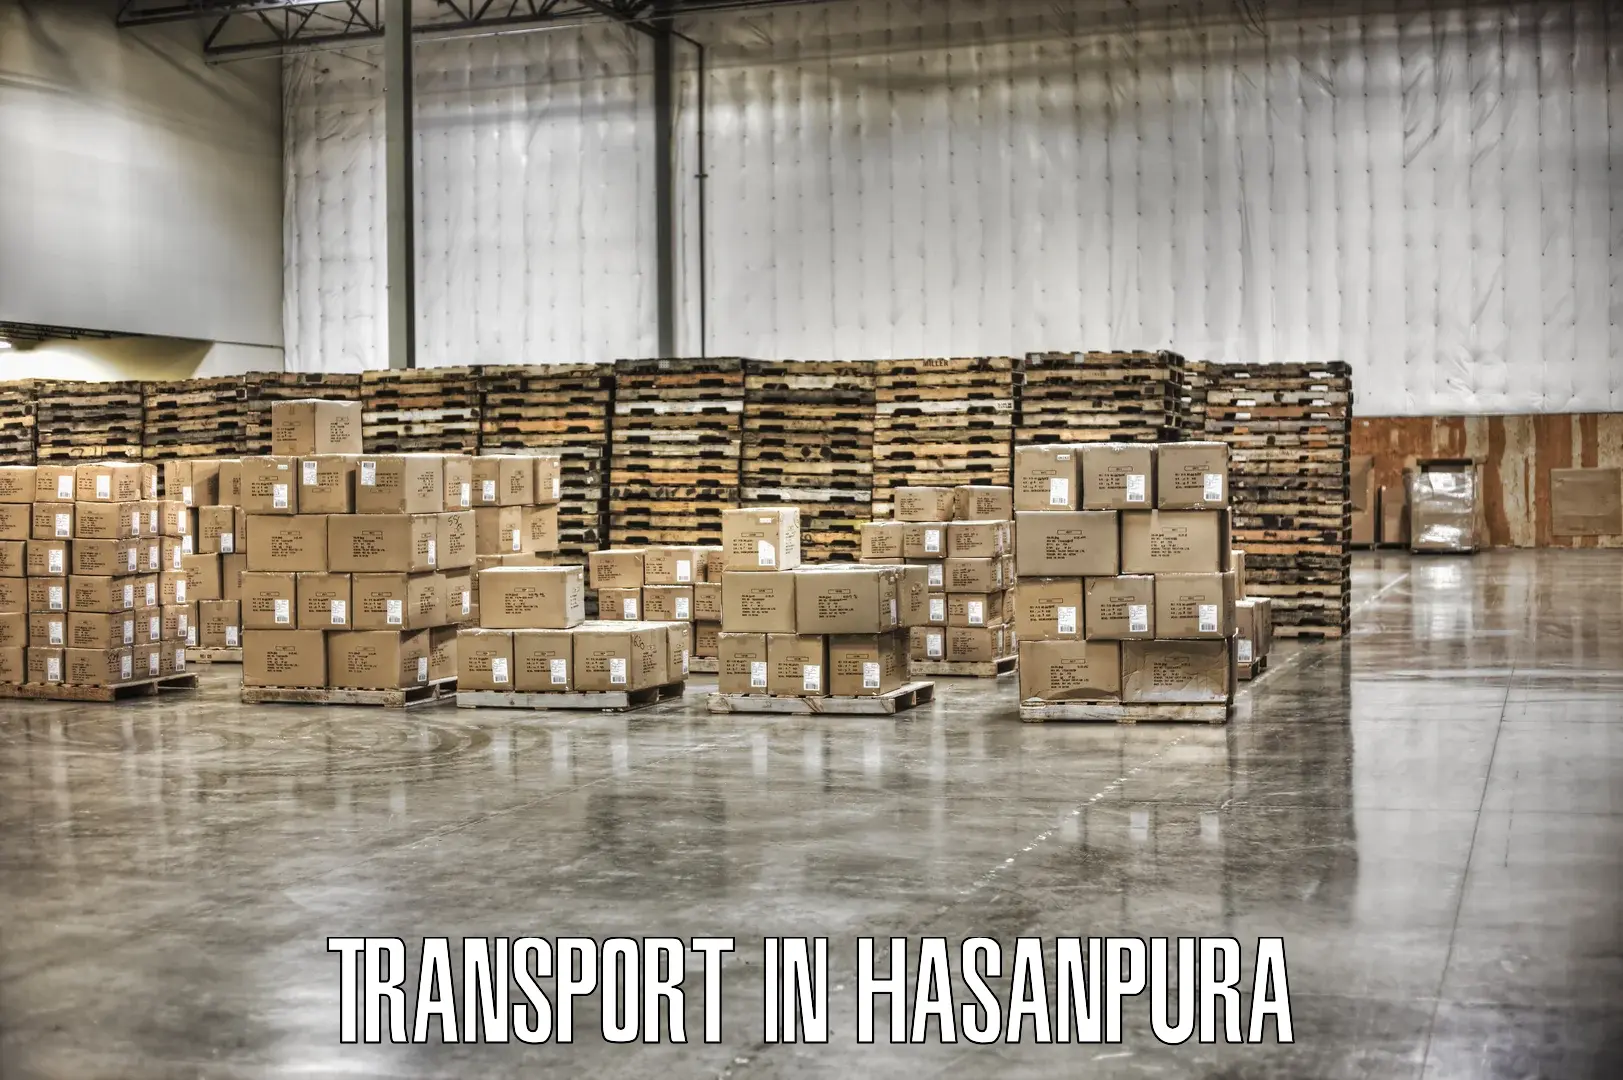 Daily parcel service transport in Hasanpura